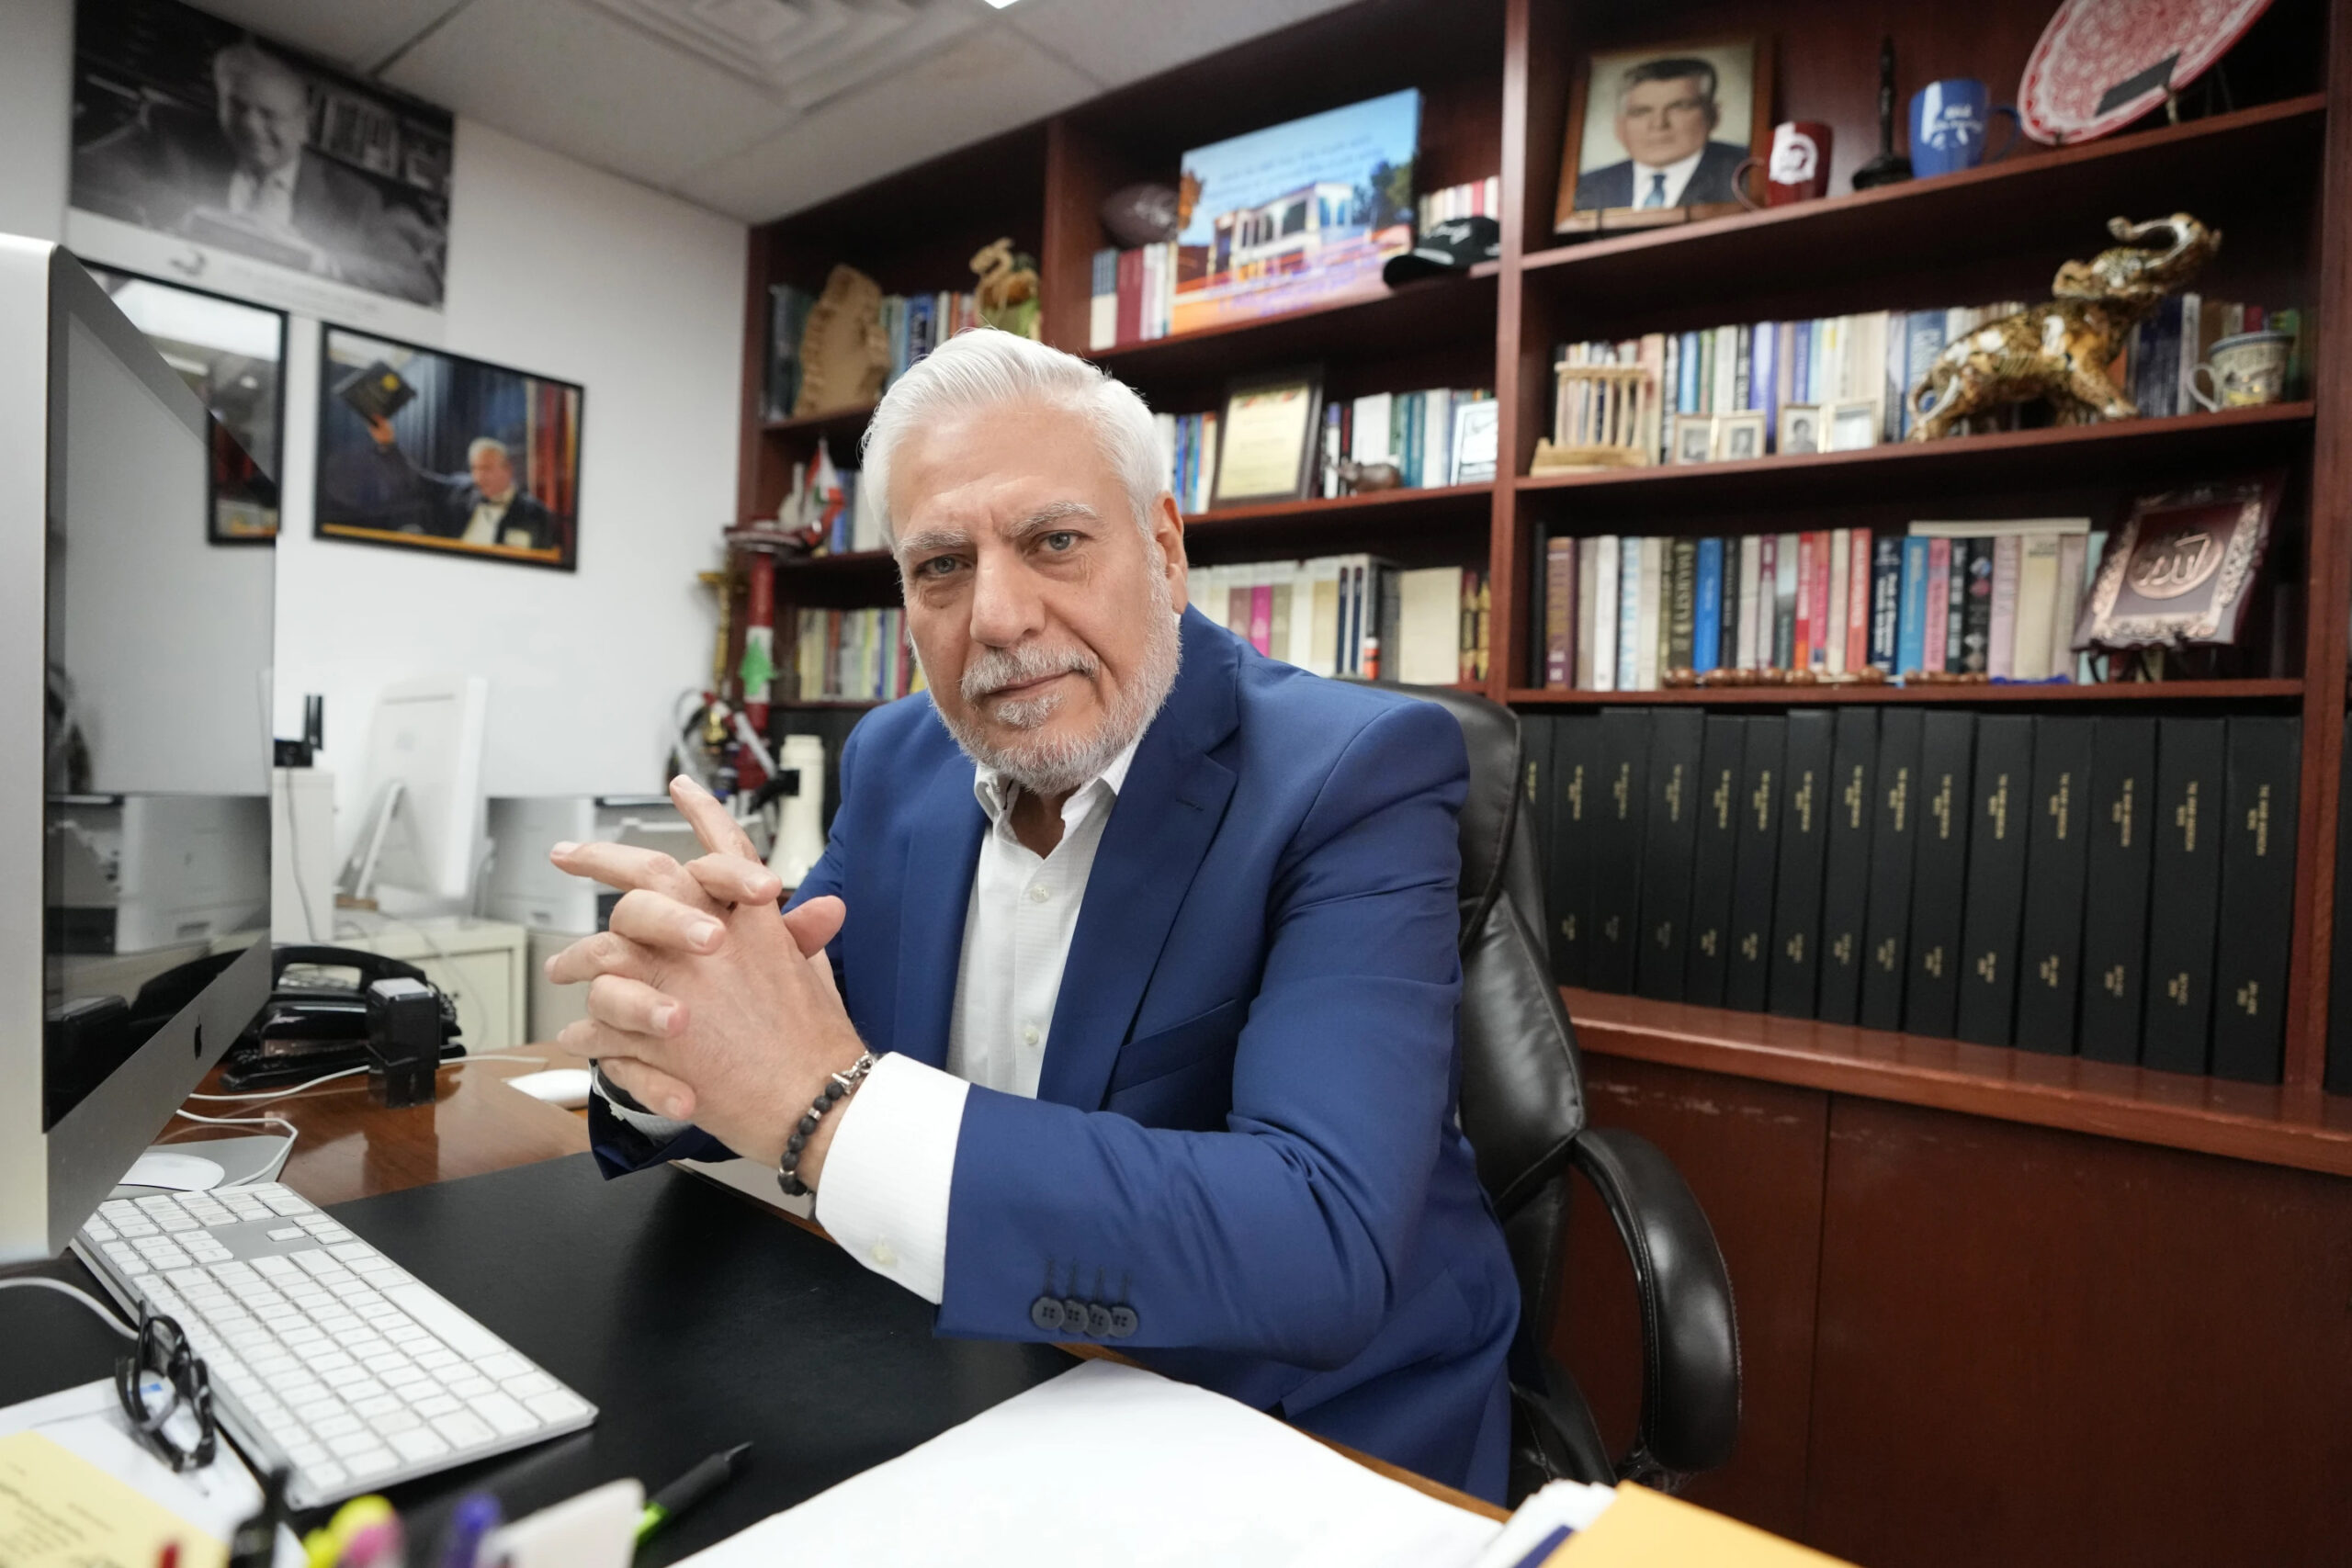 Osama Siblani, publisher of The Arab American News, photograhed in his office on April 10, in Dearborn, Michigan. – Photo by AP/Carlos Osorio